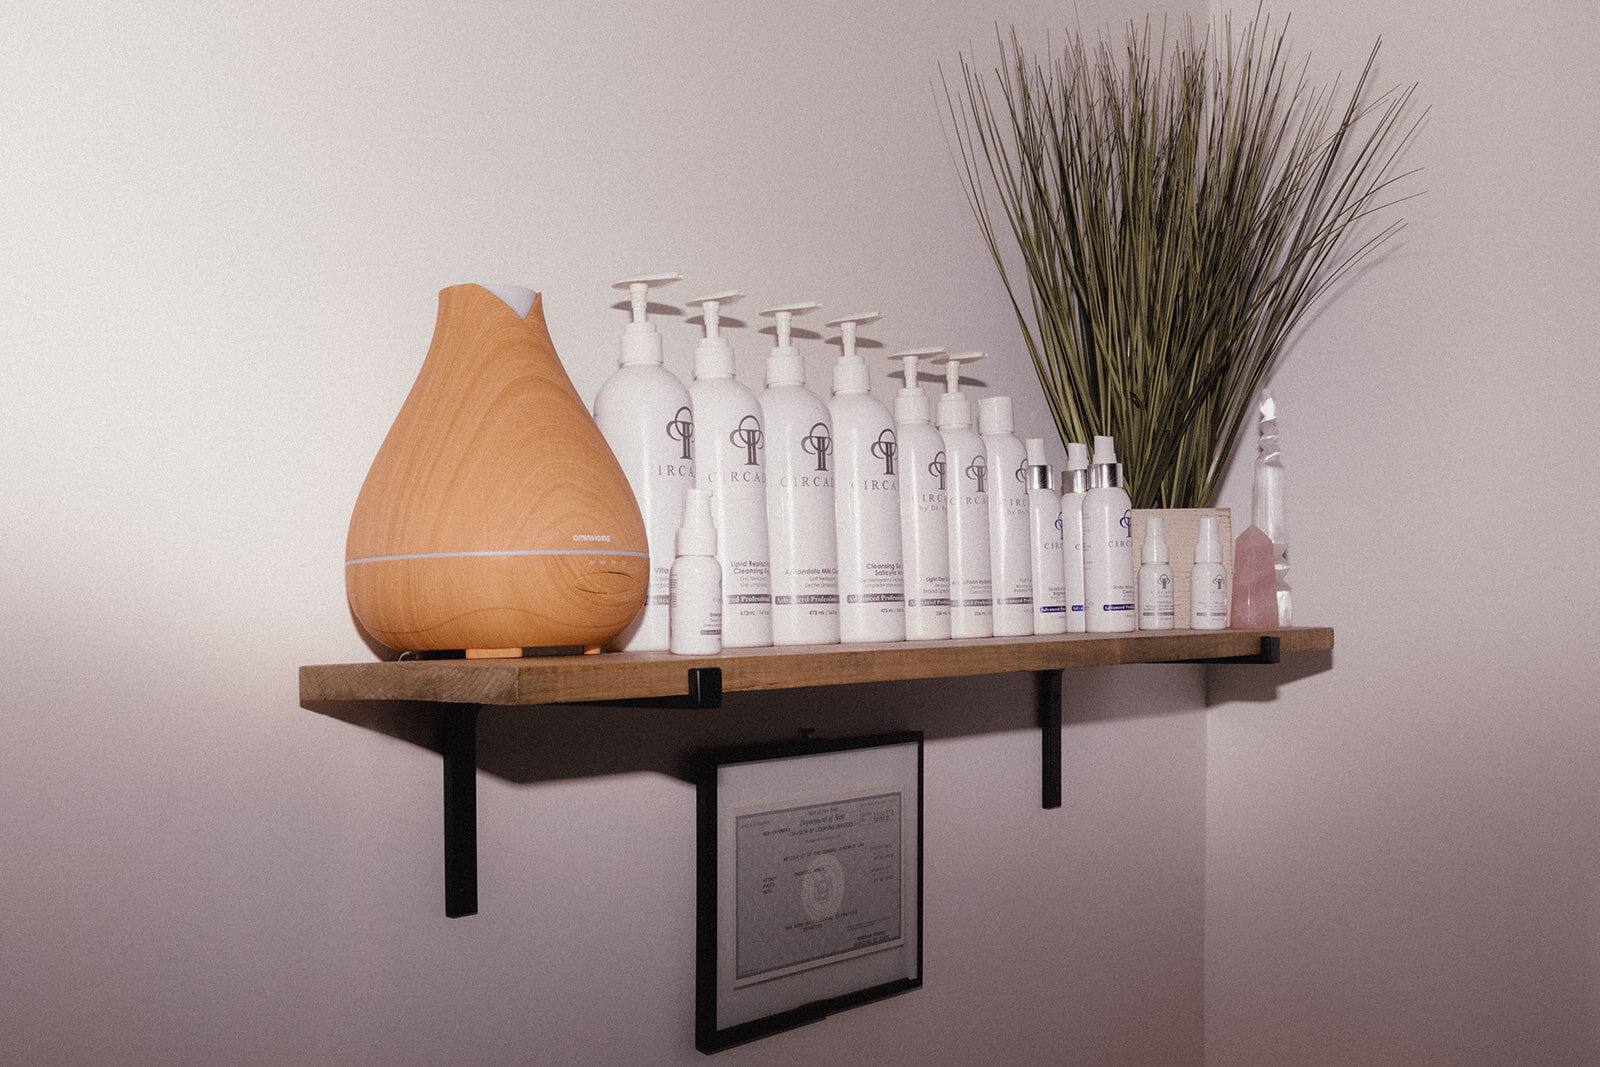 Circadia products on shelf with oil diffuser